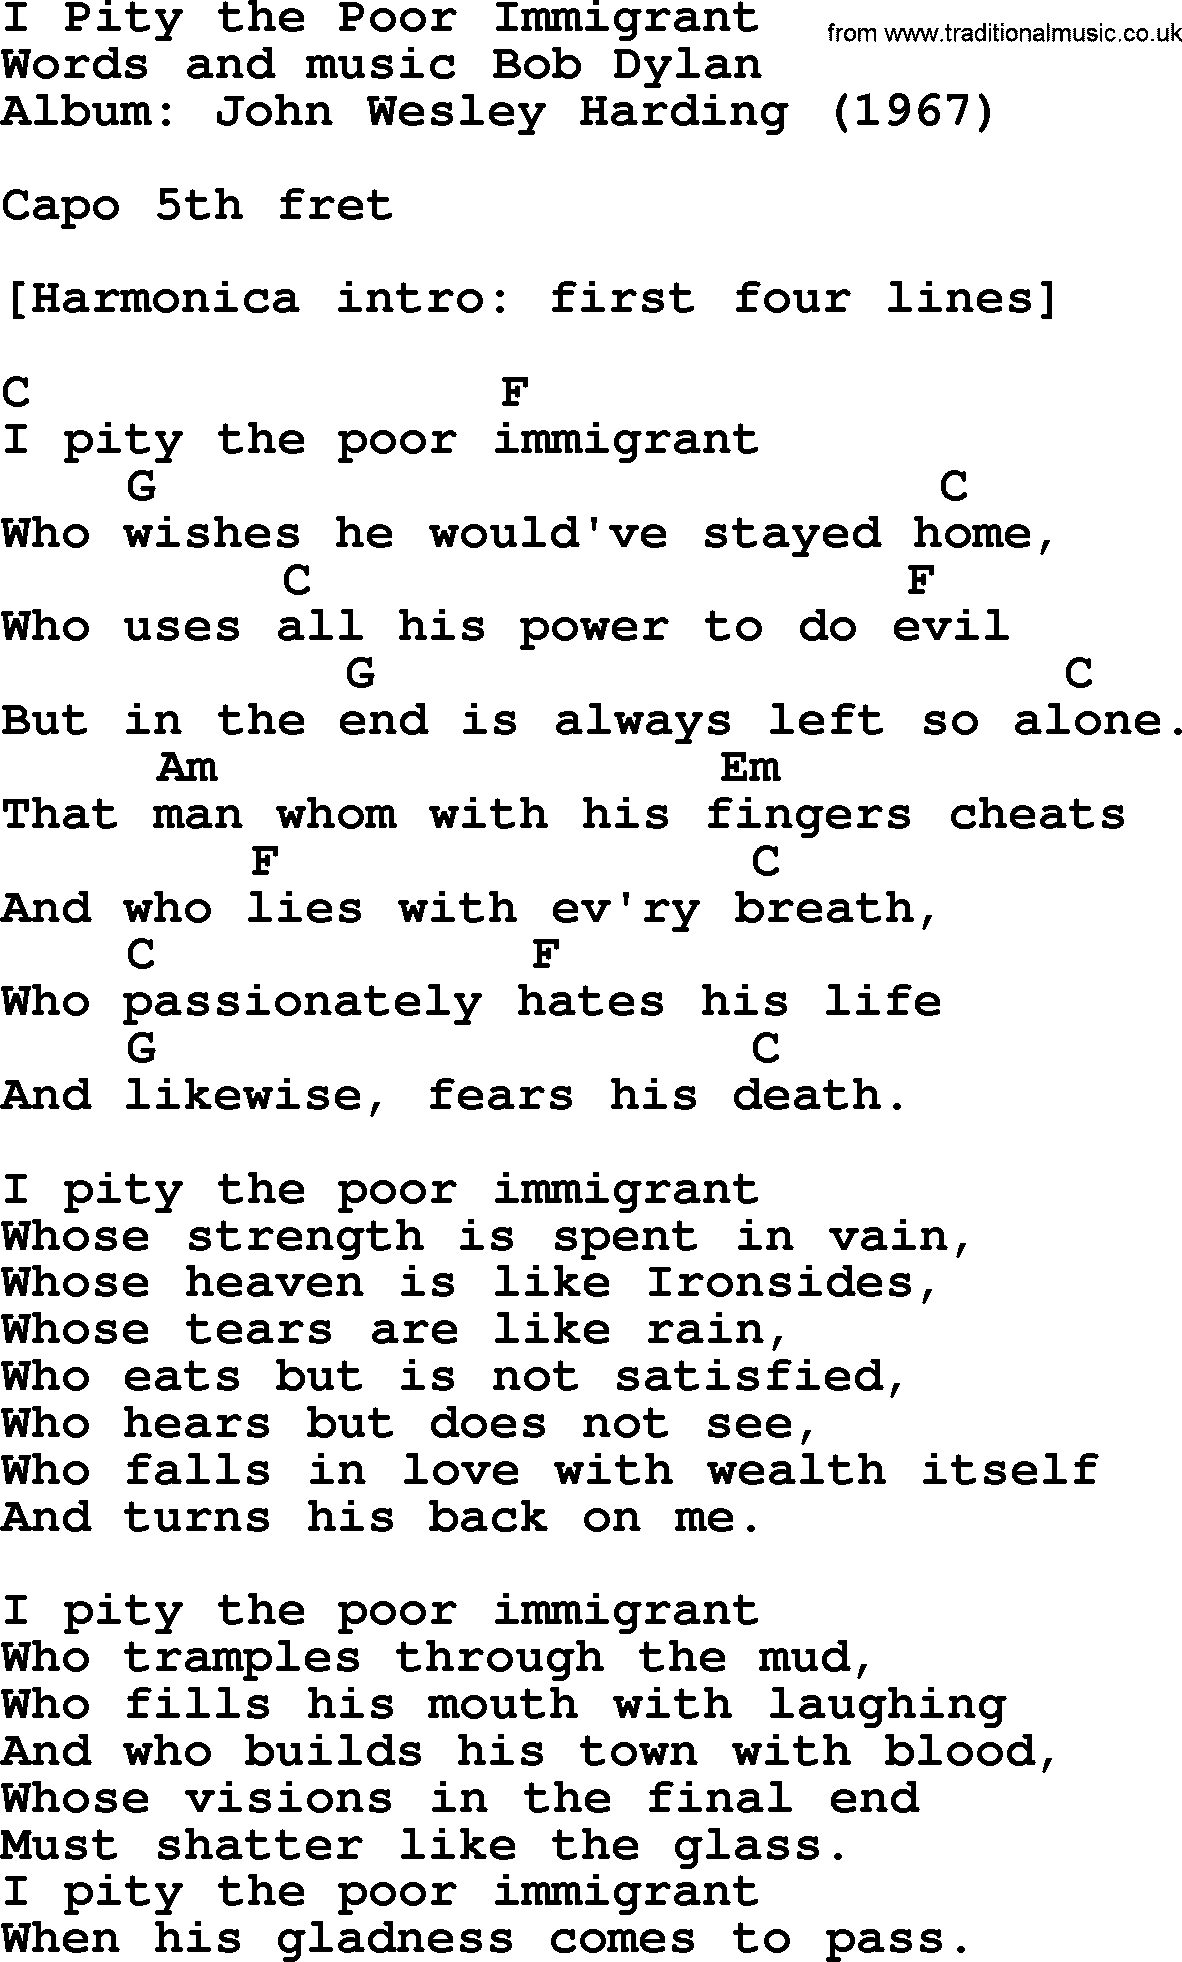 Bob Dylan song, lyrics with chords - I Pity the Poor Immigrant